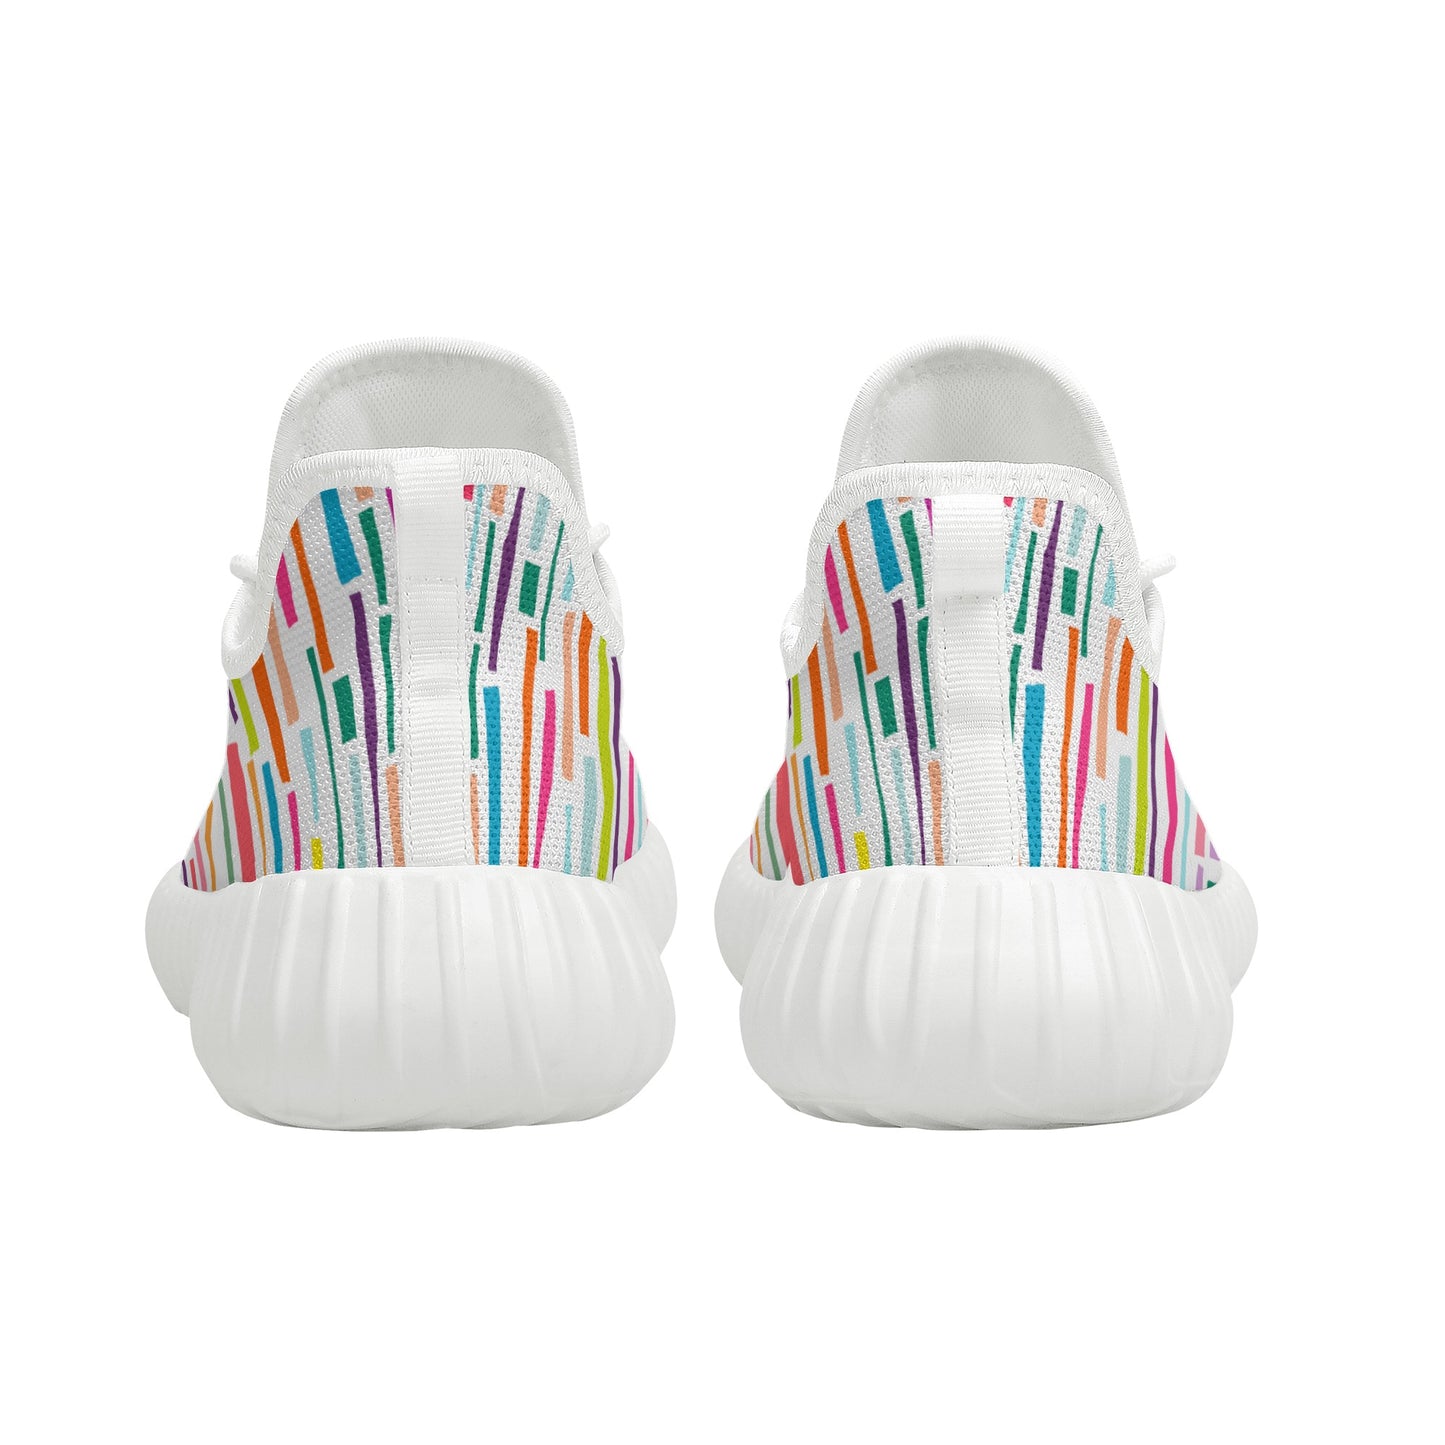 Lines of Color - PreTeen - Women's Mesh Knit Sneakers